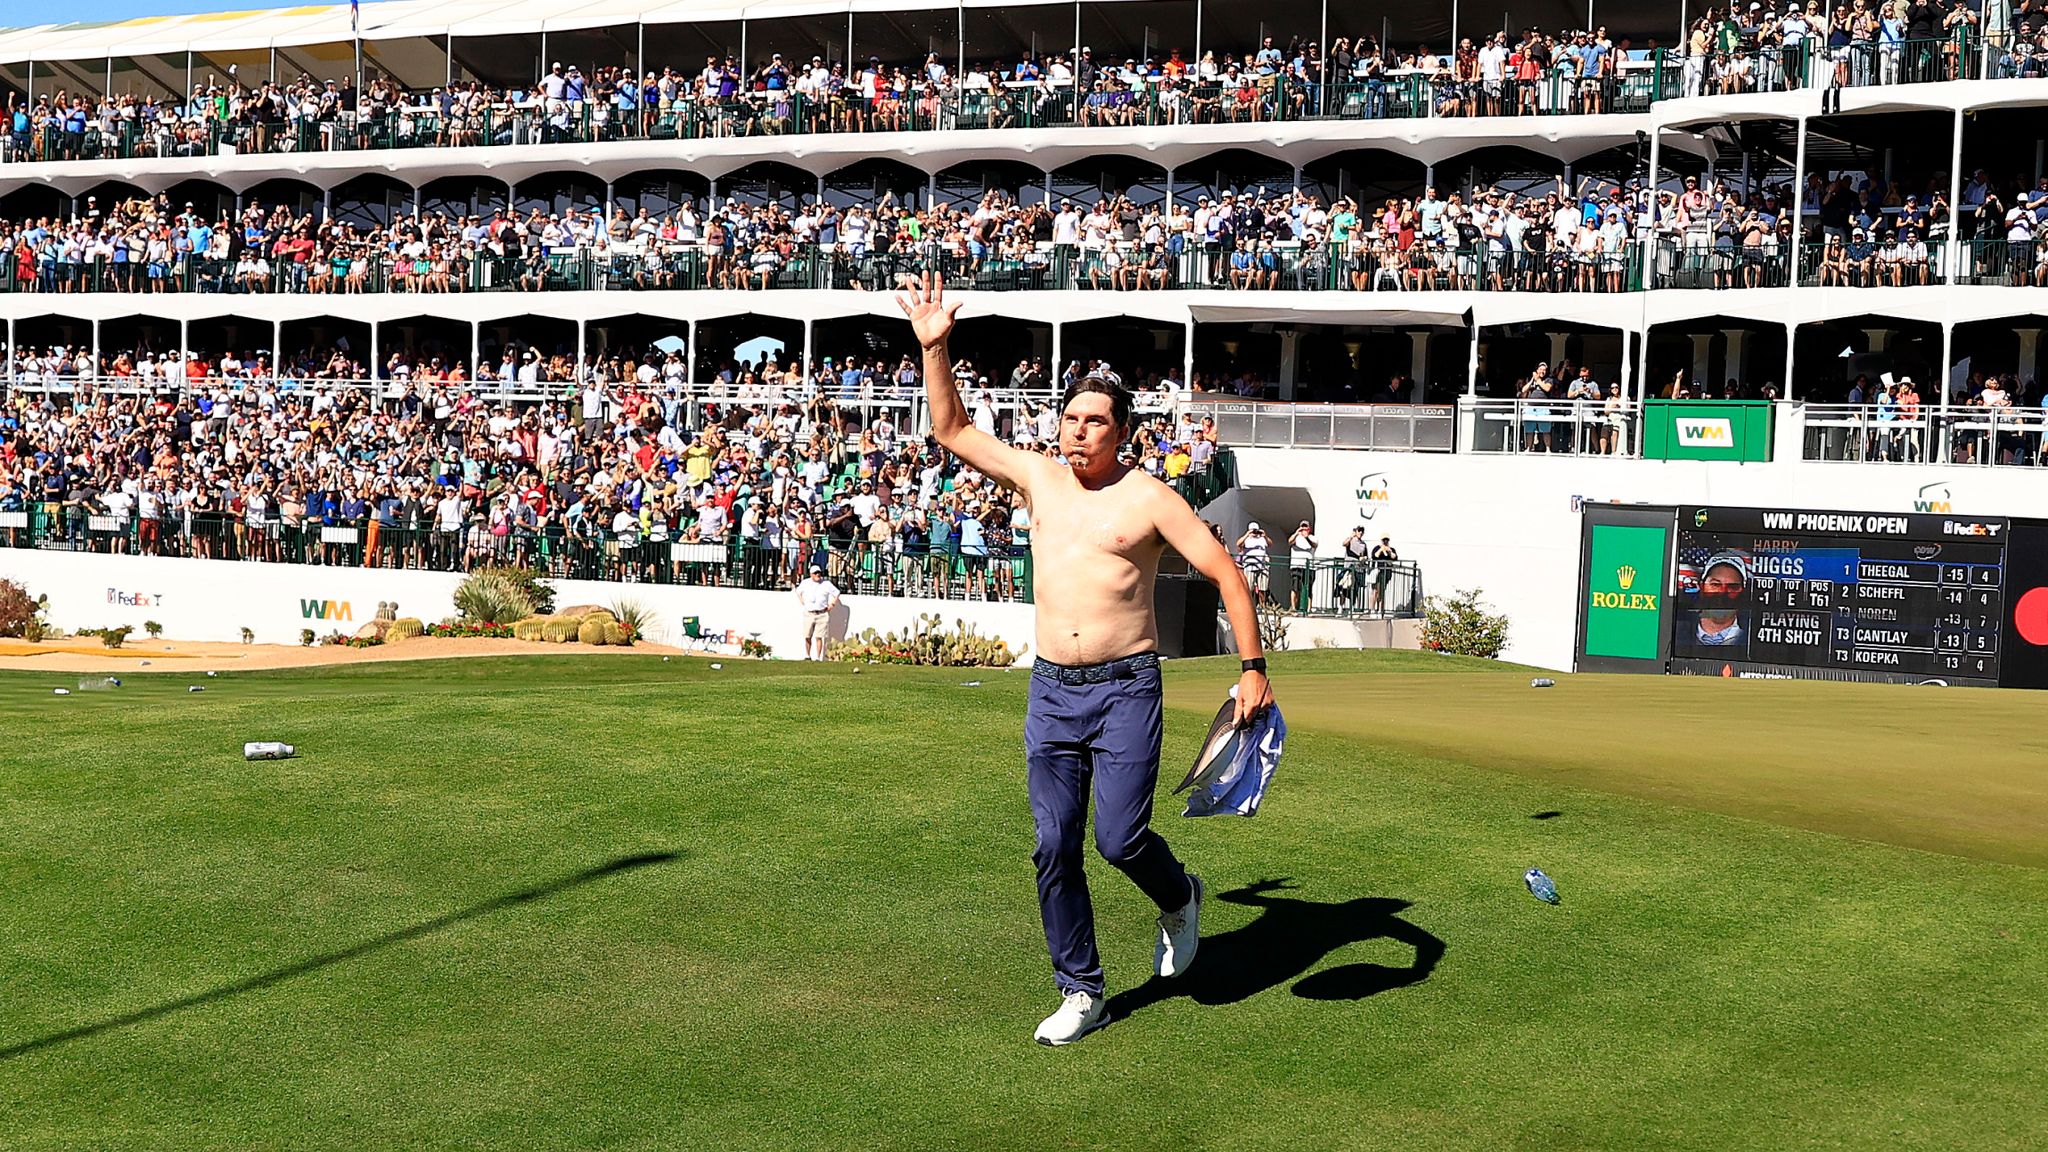 Beer throwing at Phoenix Open unacceptable, says PGA Tour commissioner Jay Monahan Golf News Sky Sports